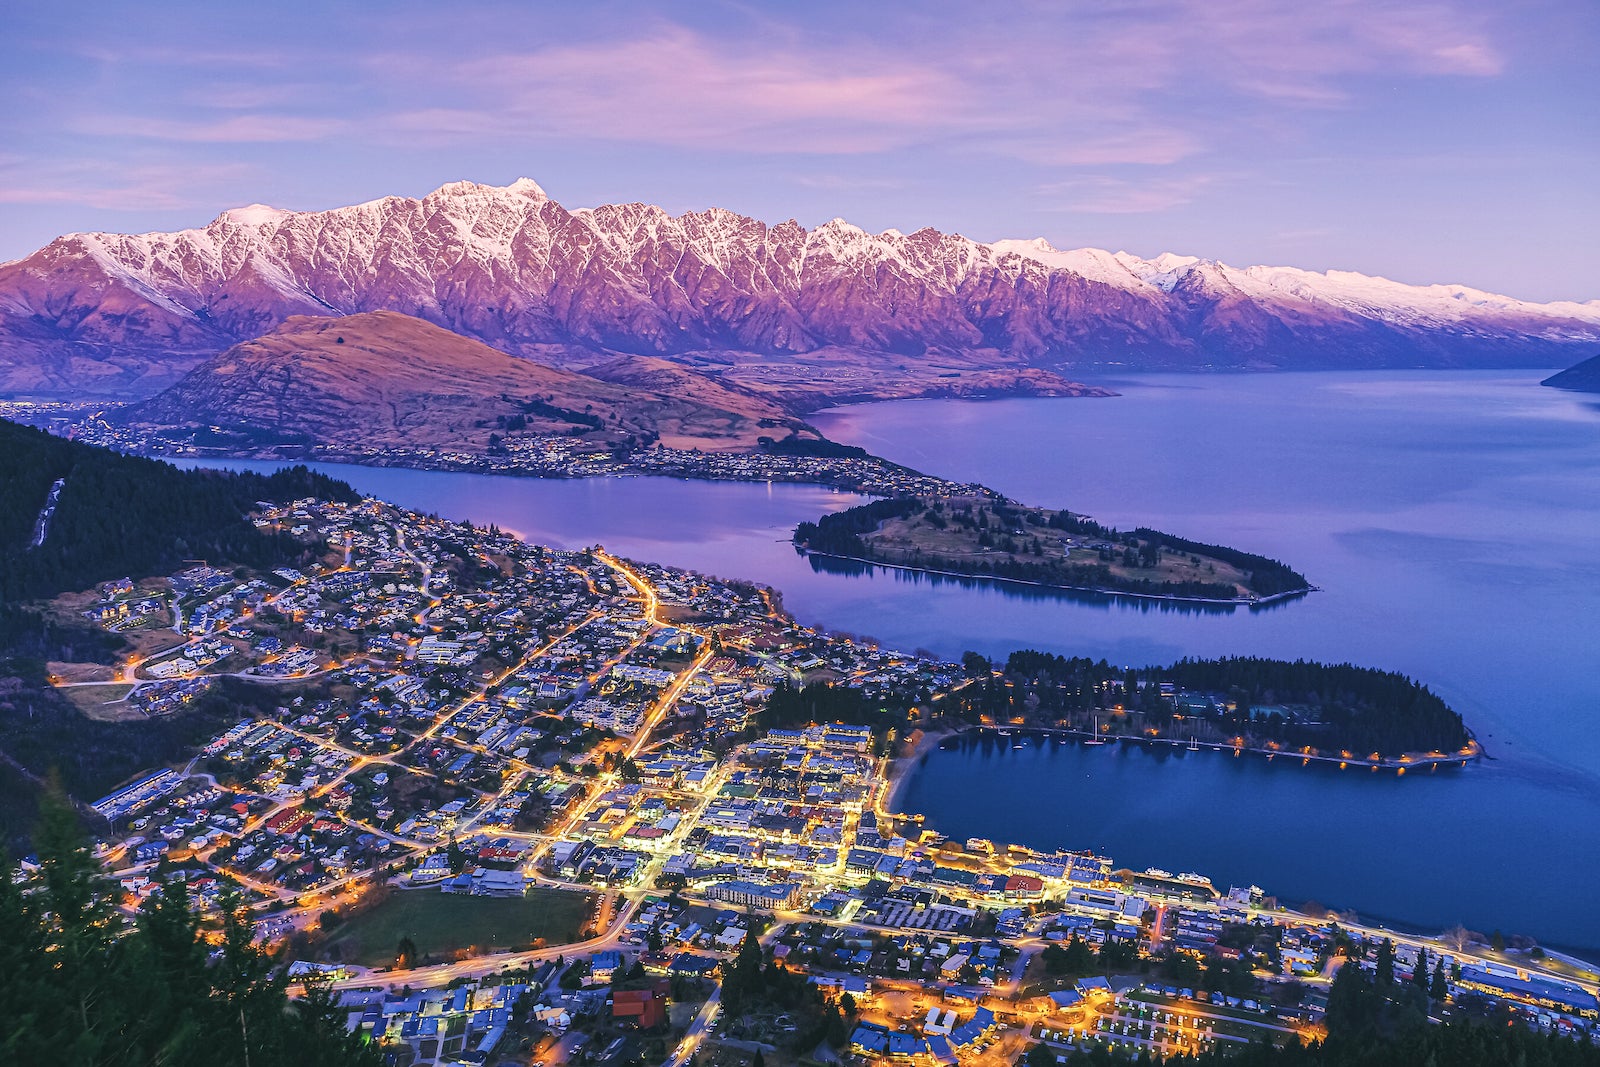 Aerial View of Queenstown at Dusk with Lake Wakatipu and The Remarkables, New Zealand